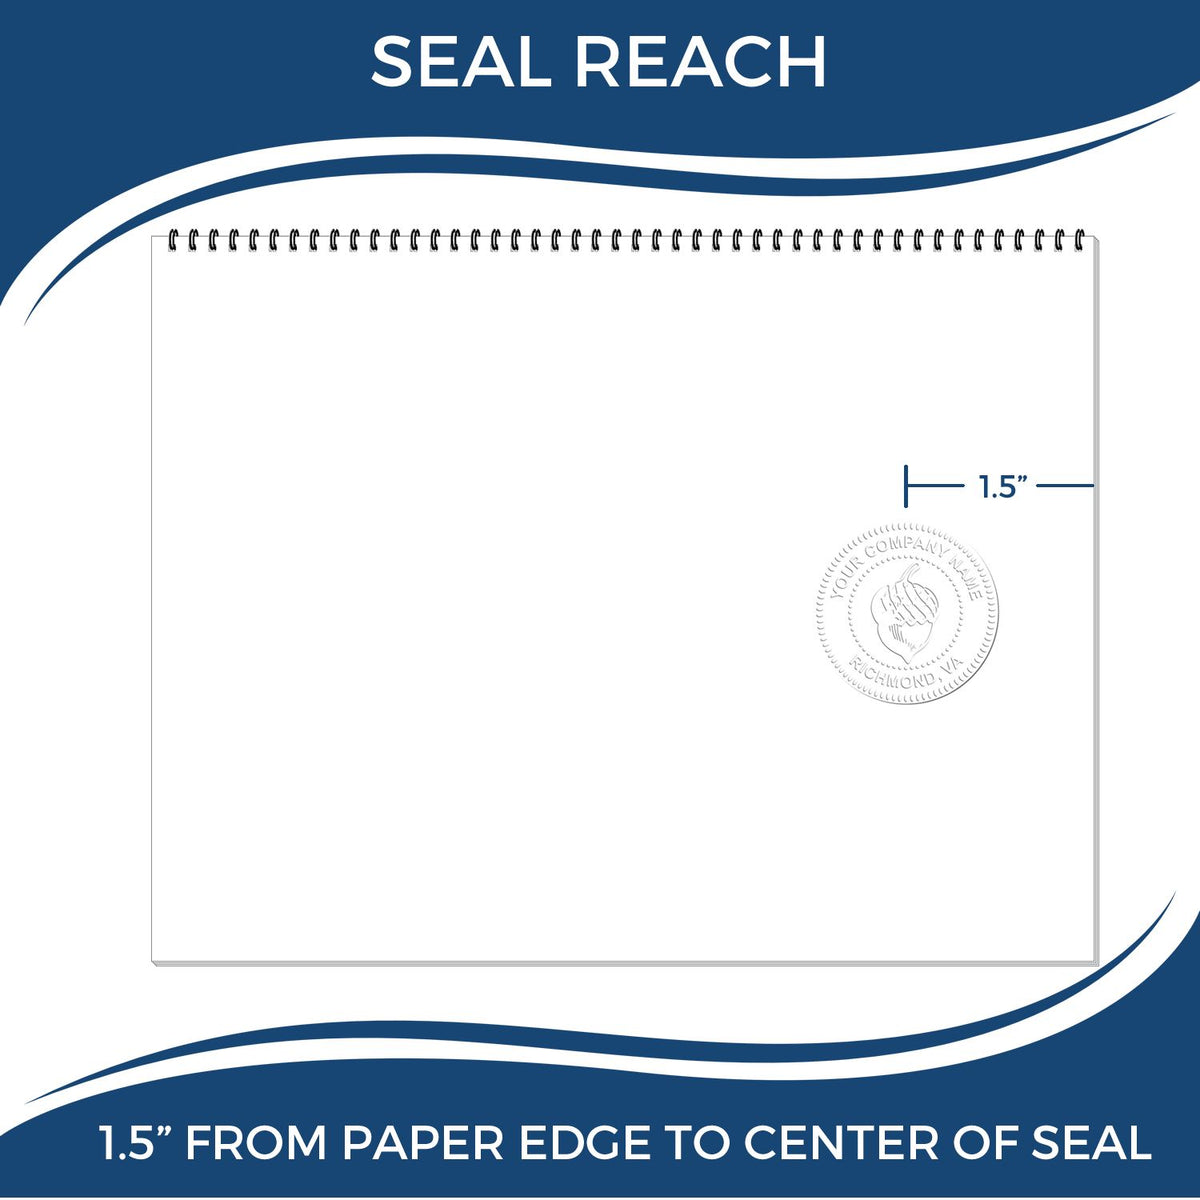 An infographic showing the seal reach which is represented by a ruler and a miniature seal image of the Gift District of Columbia Geologist Seal